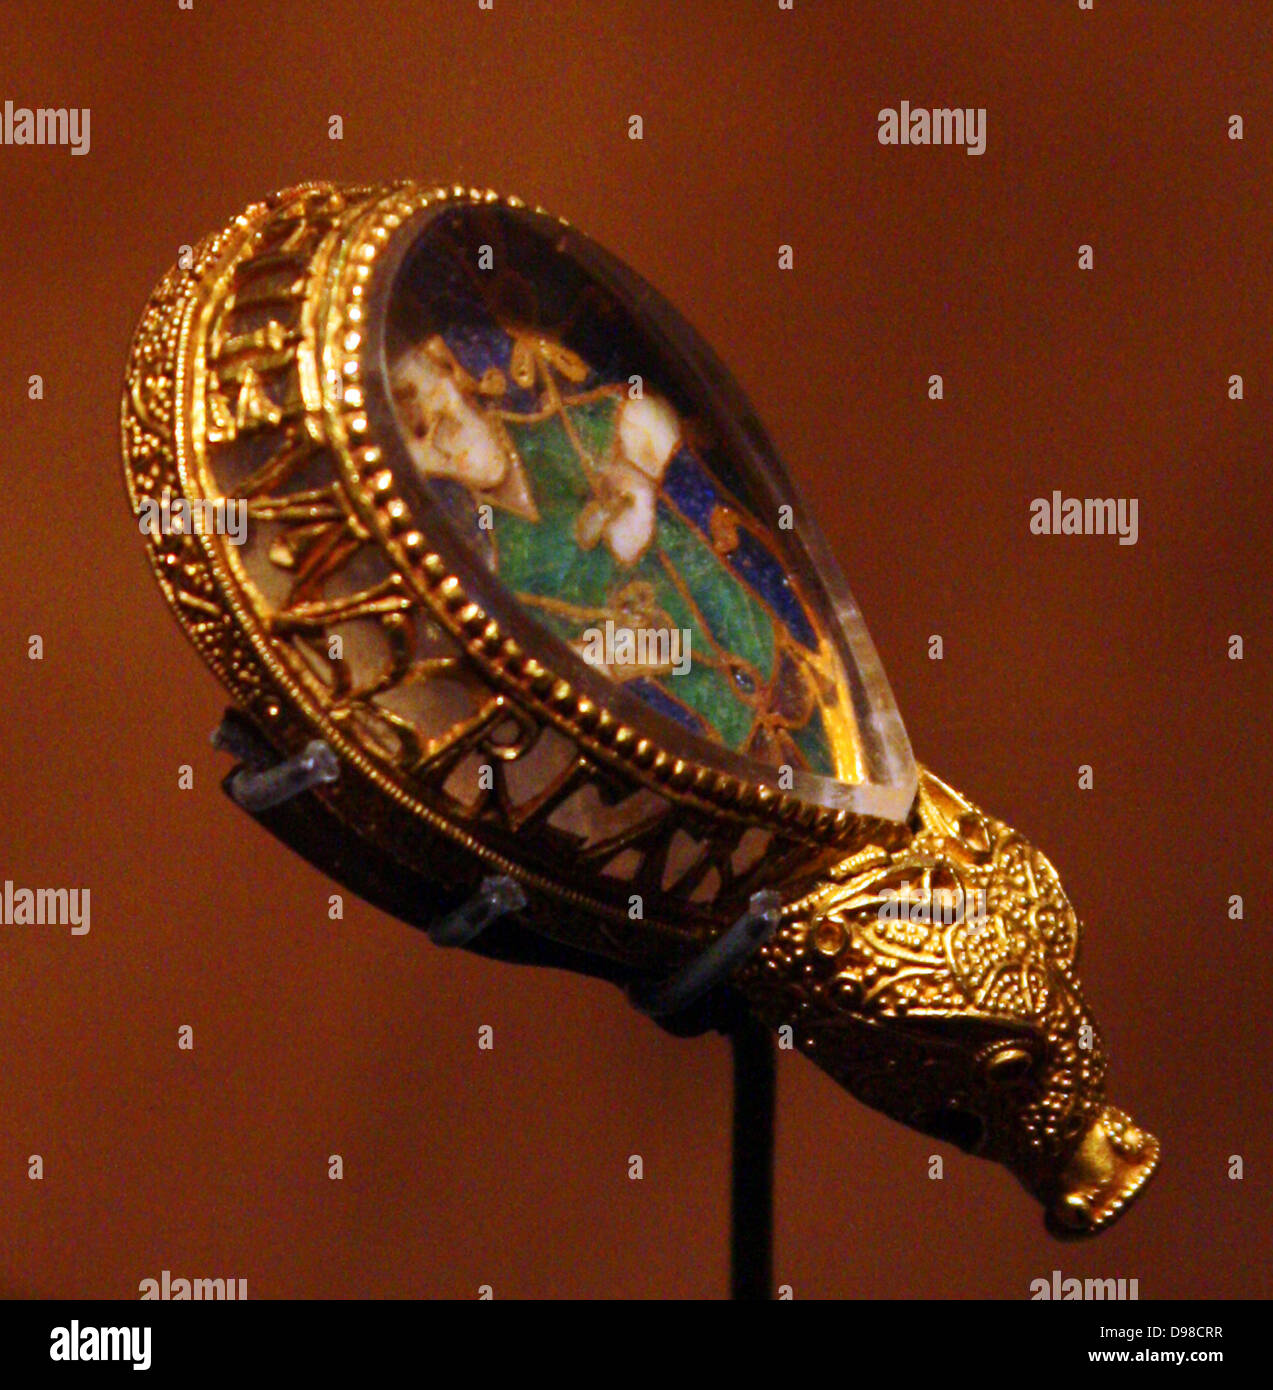 The Alfred Jewel is probably the single most famous archaeological object in England. It is comprised of a piece of cloisonne enamel depicting a human figure, though to be a representation of the sense of sight. The enamel is covered by a polished piece of rock crystal and set in a gold frame that terminates in a beast's head. Stock Photo